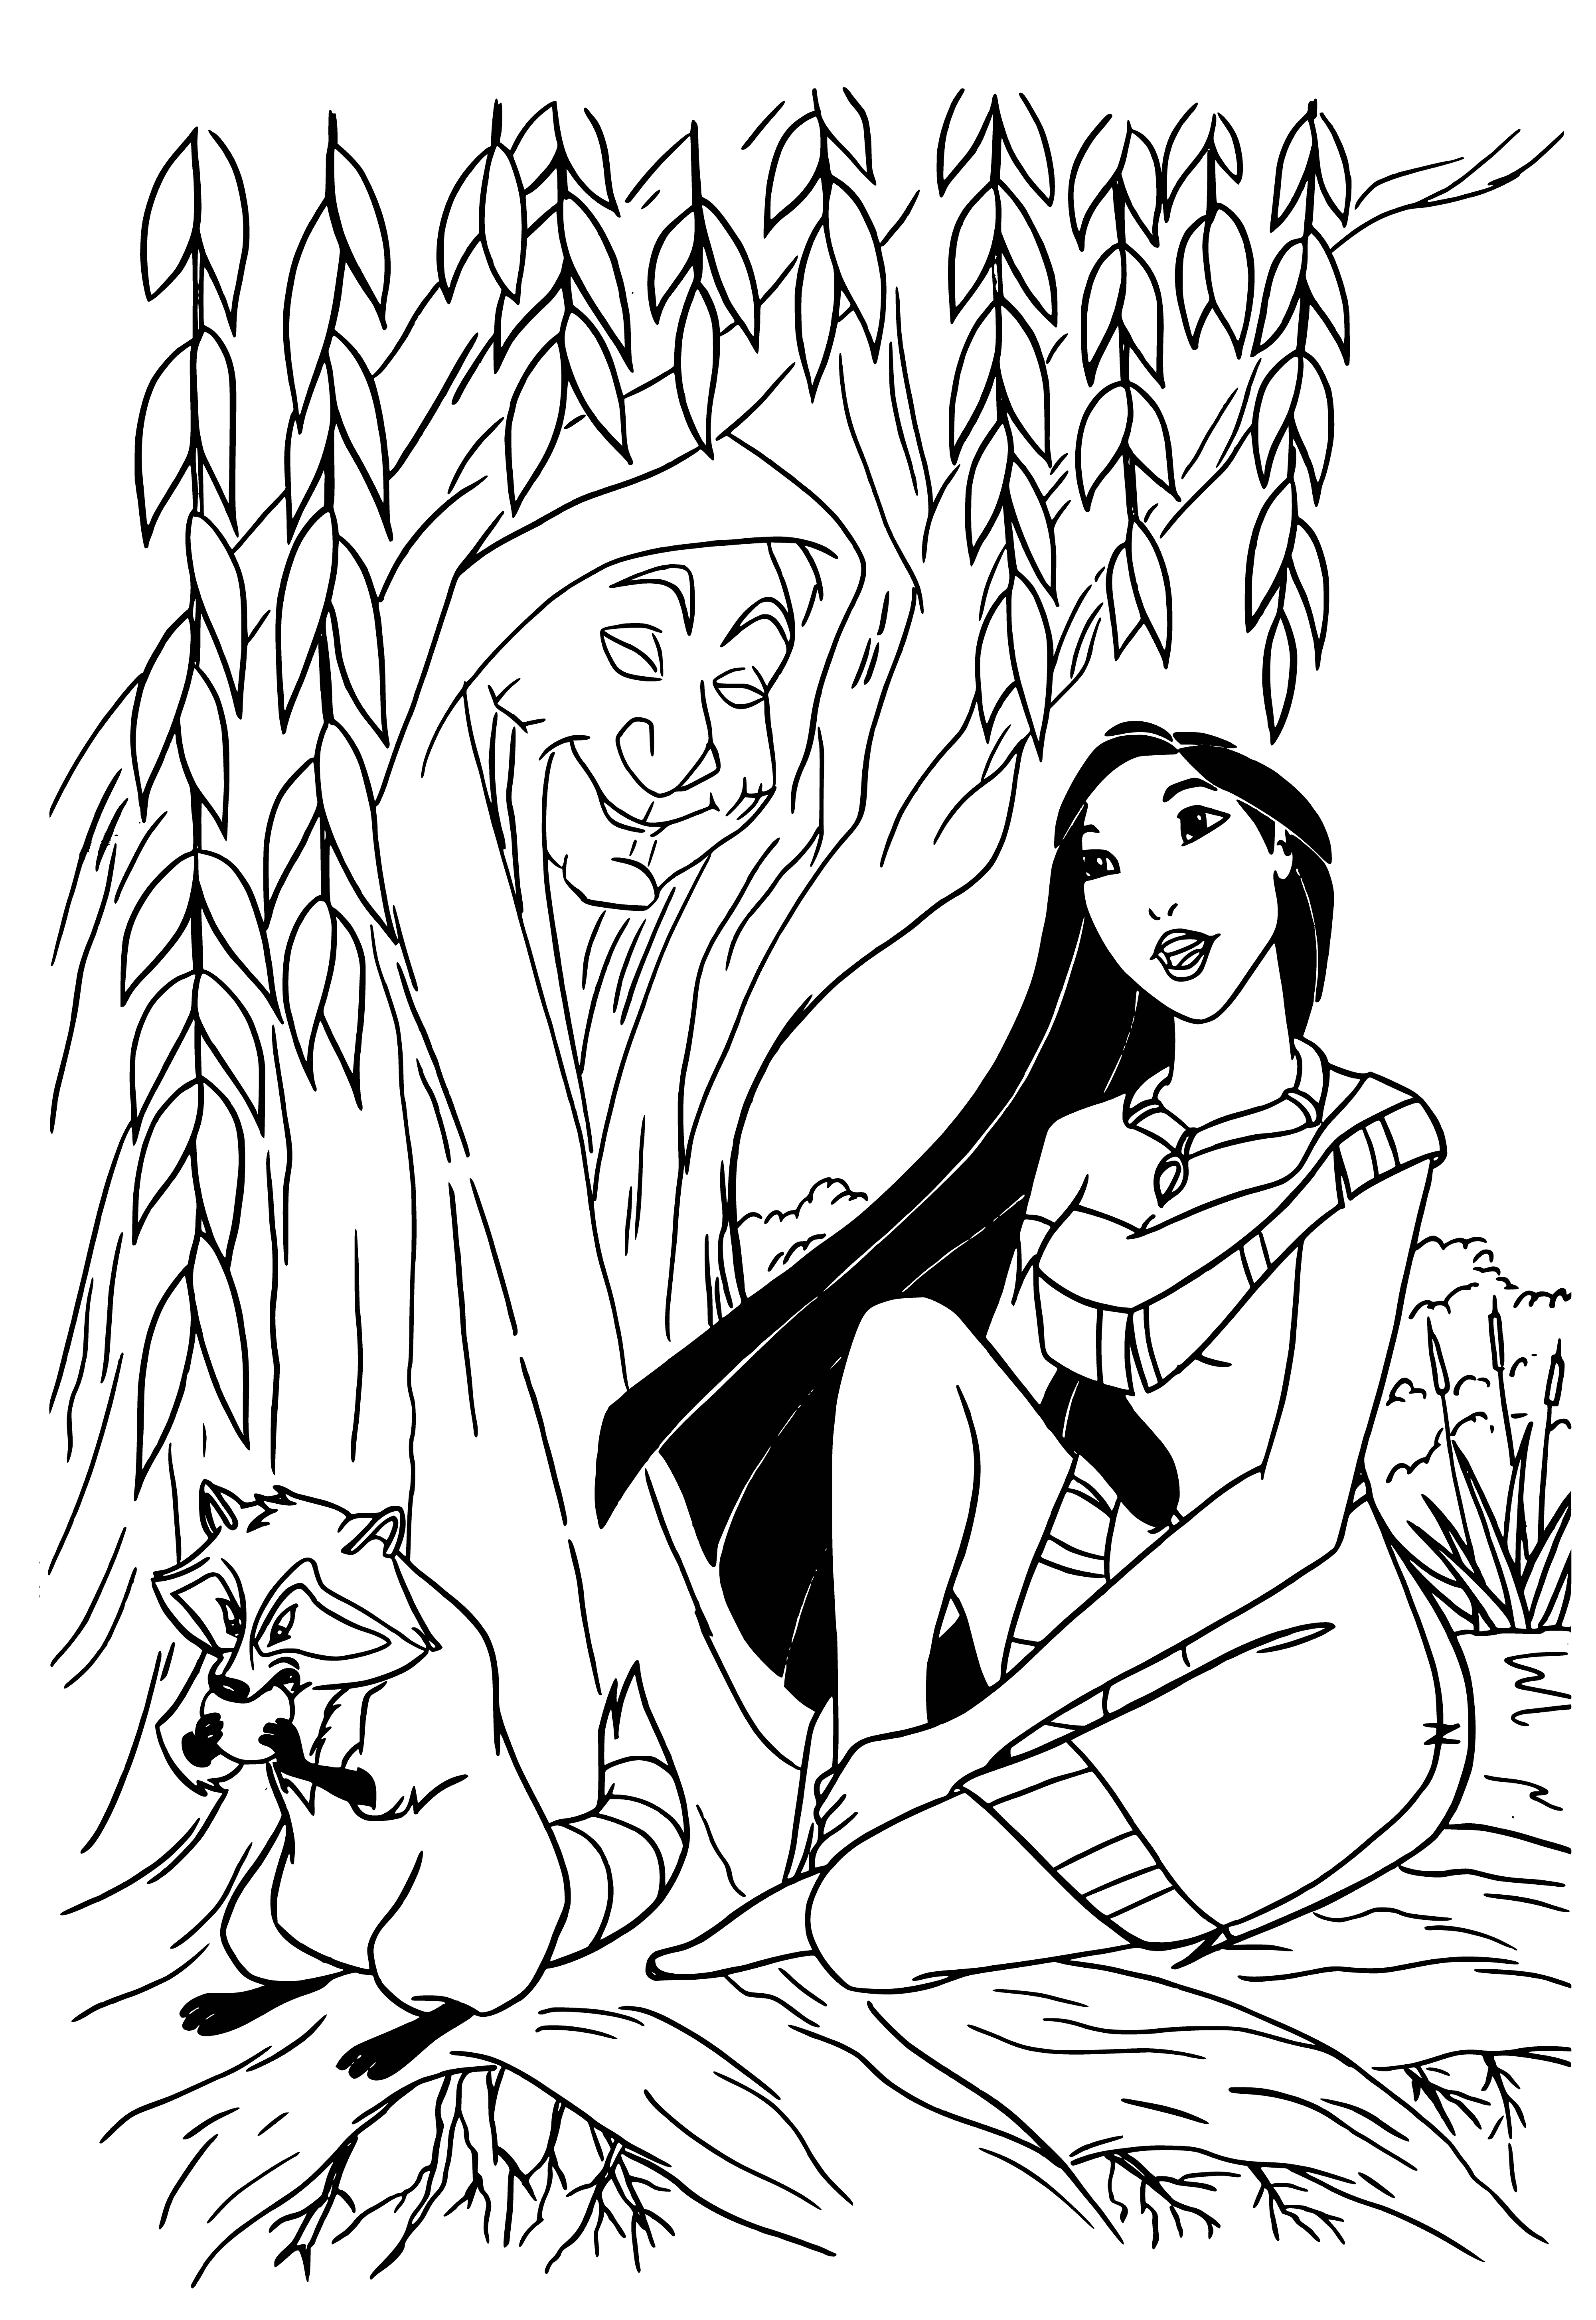 coloring page: Grandma and Pocahontas exchange kind looks in a green peaceful forest.